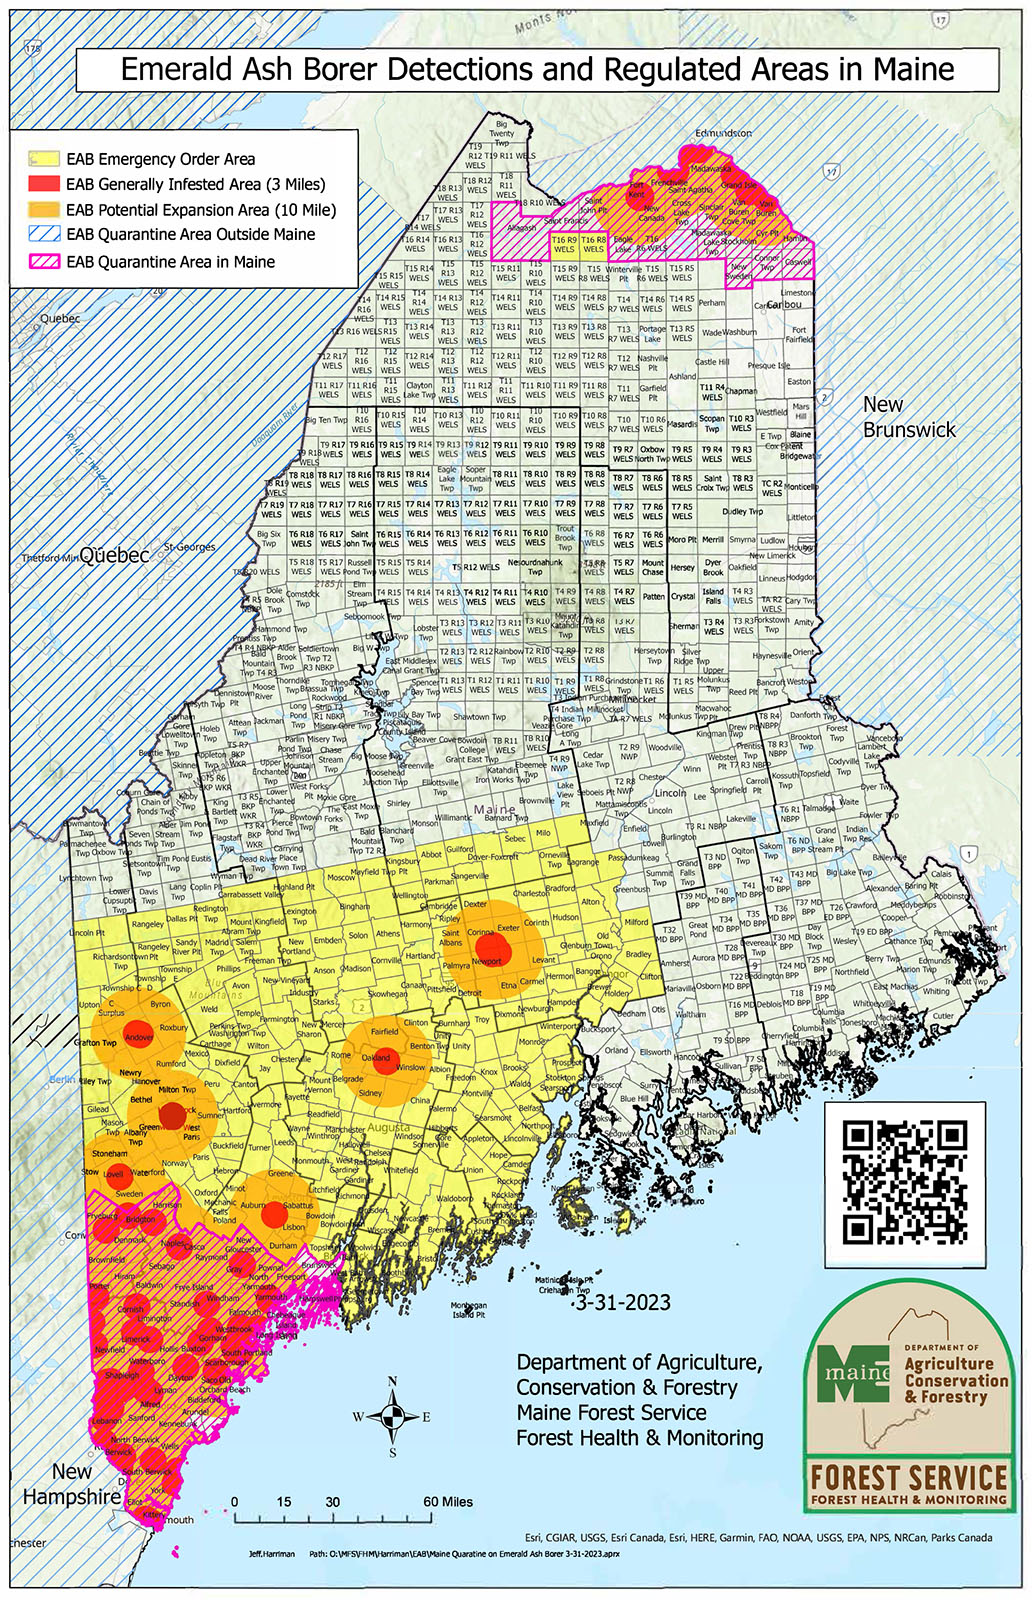 Maine Emerald Ash Borer detections and regulated areas as of March 31, 2023